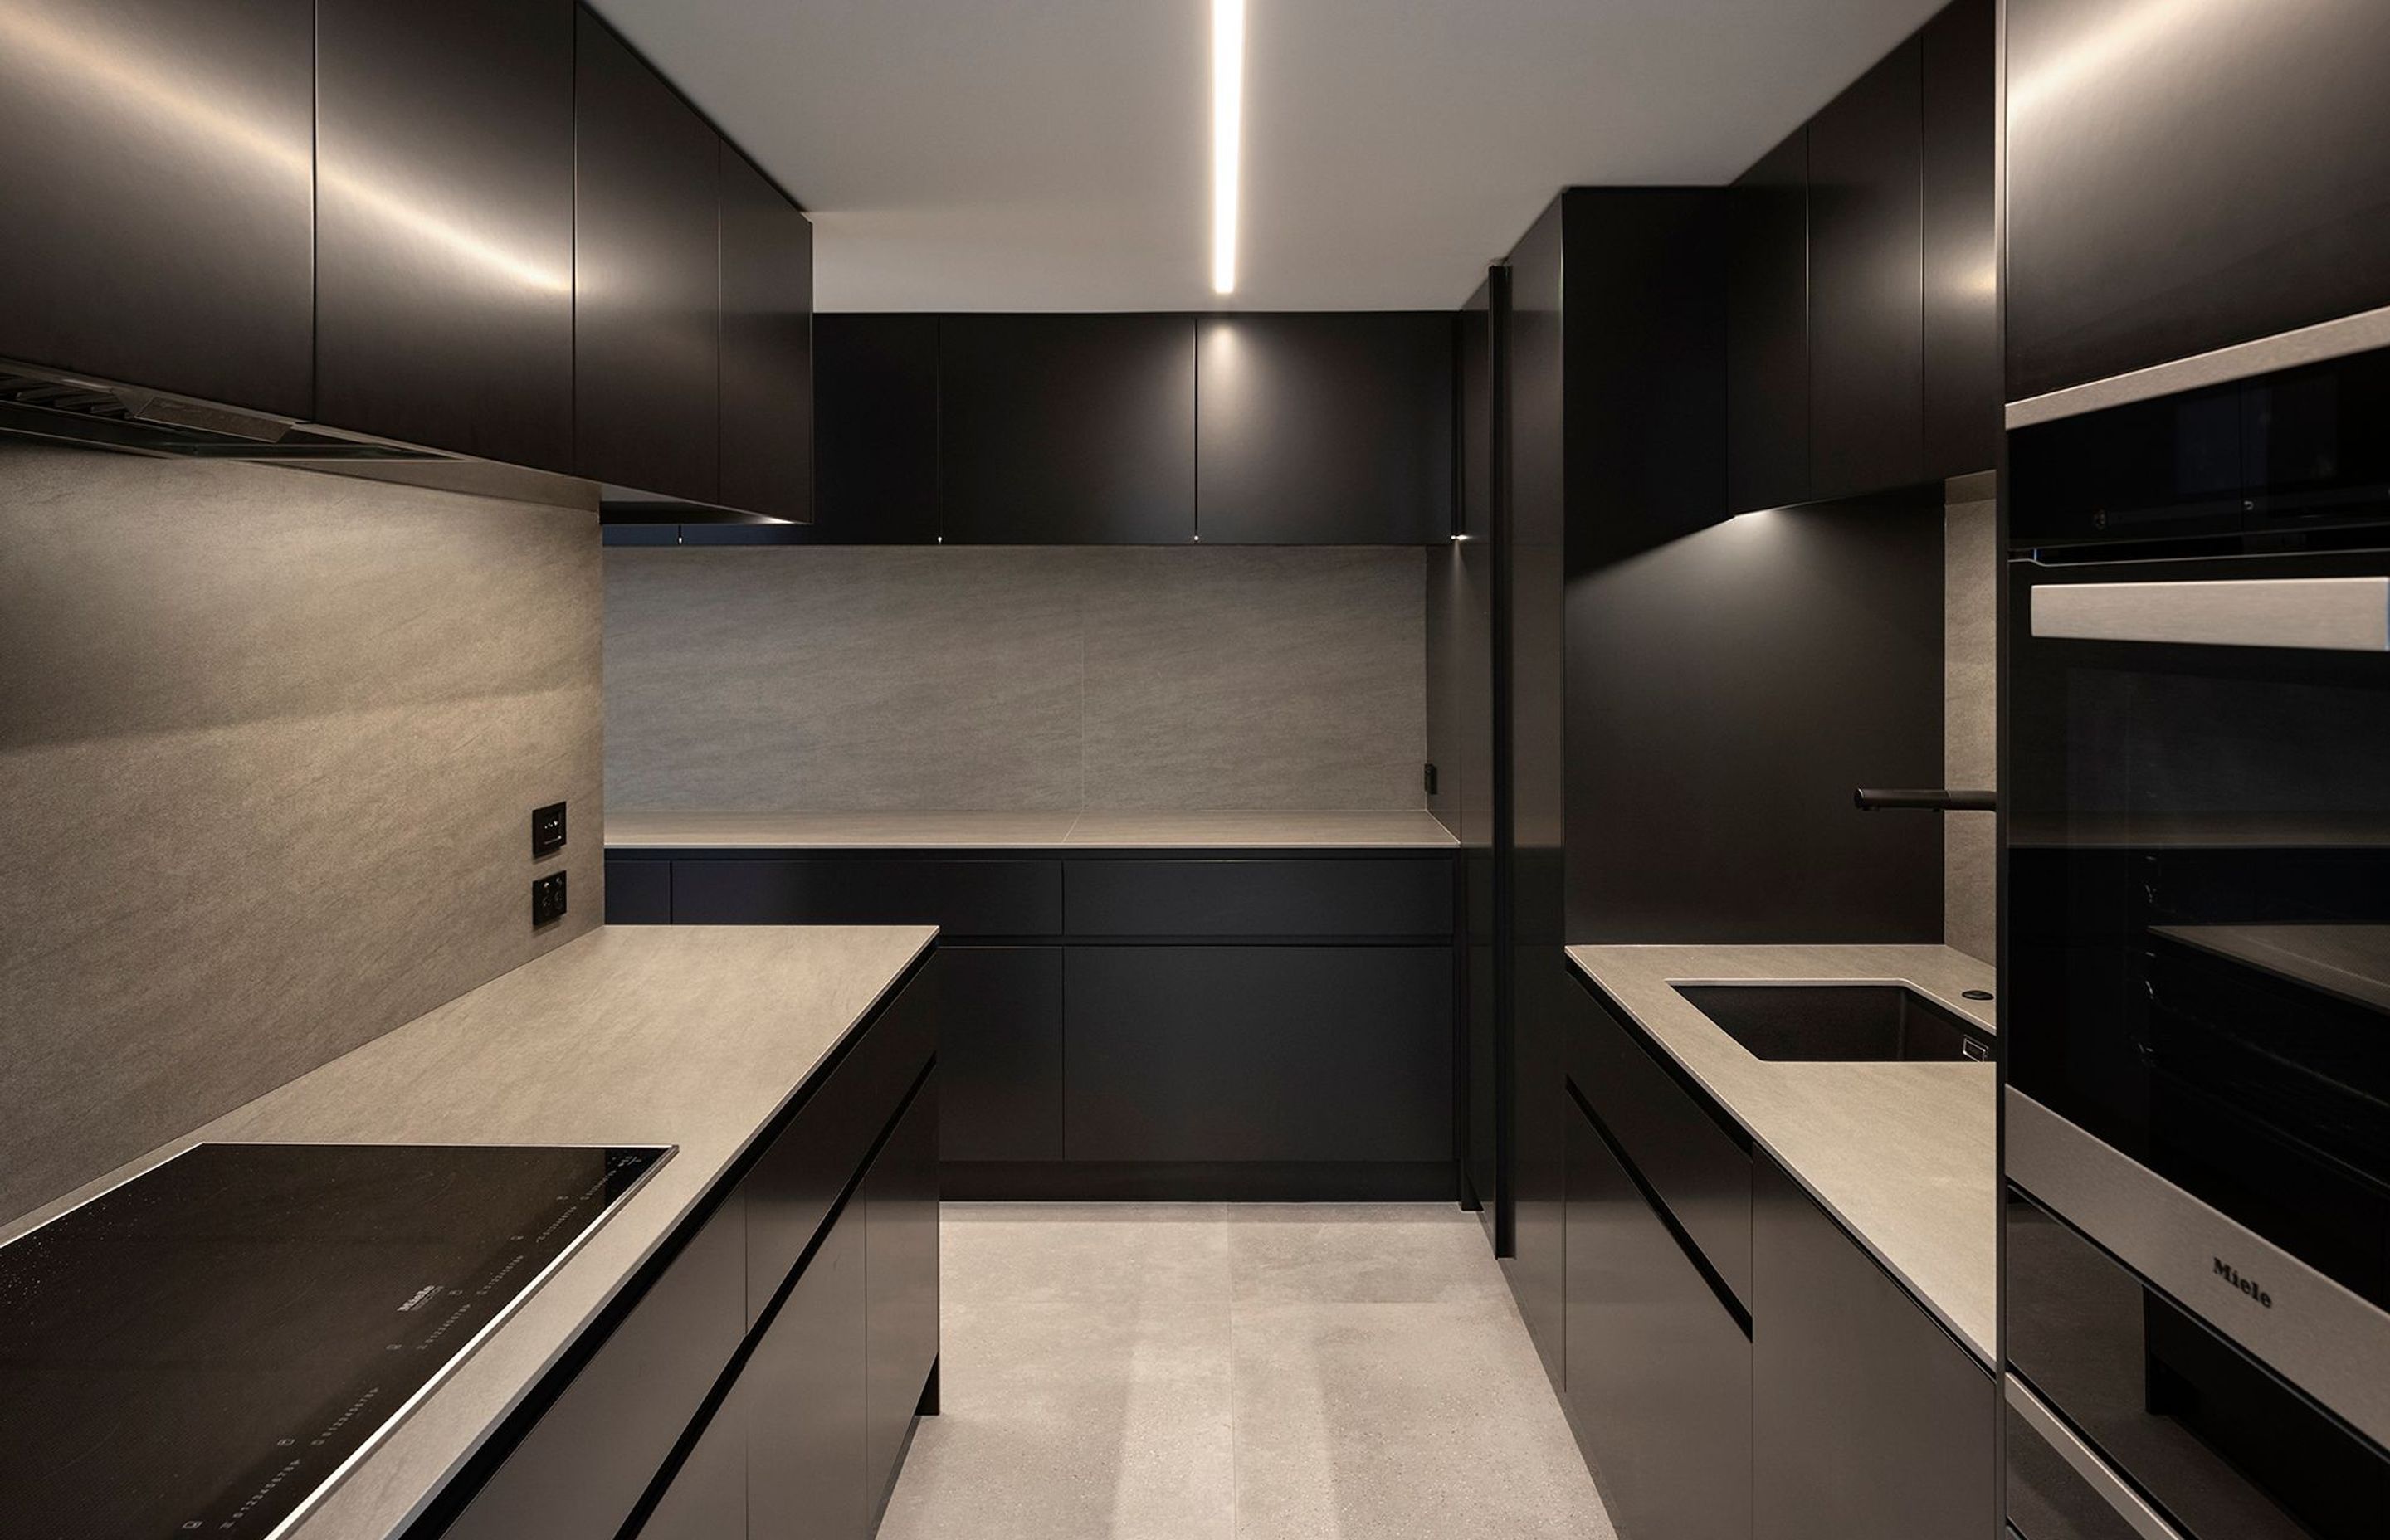 Located in a separate space, the working heart of the kitchen is removed from the living areas.